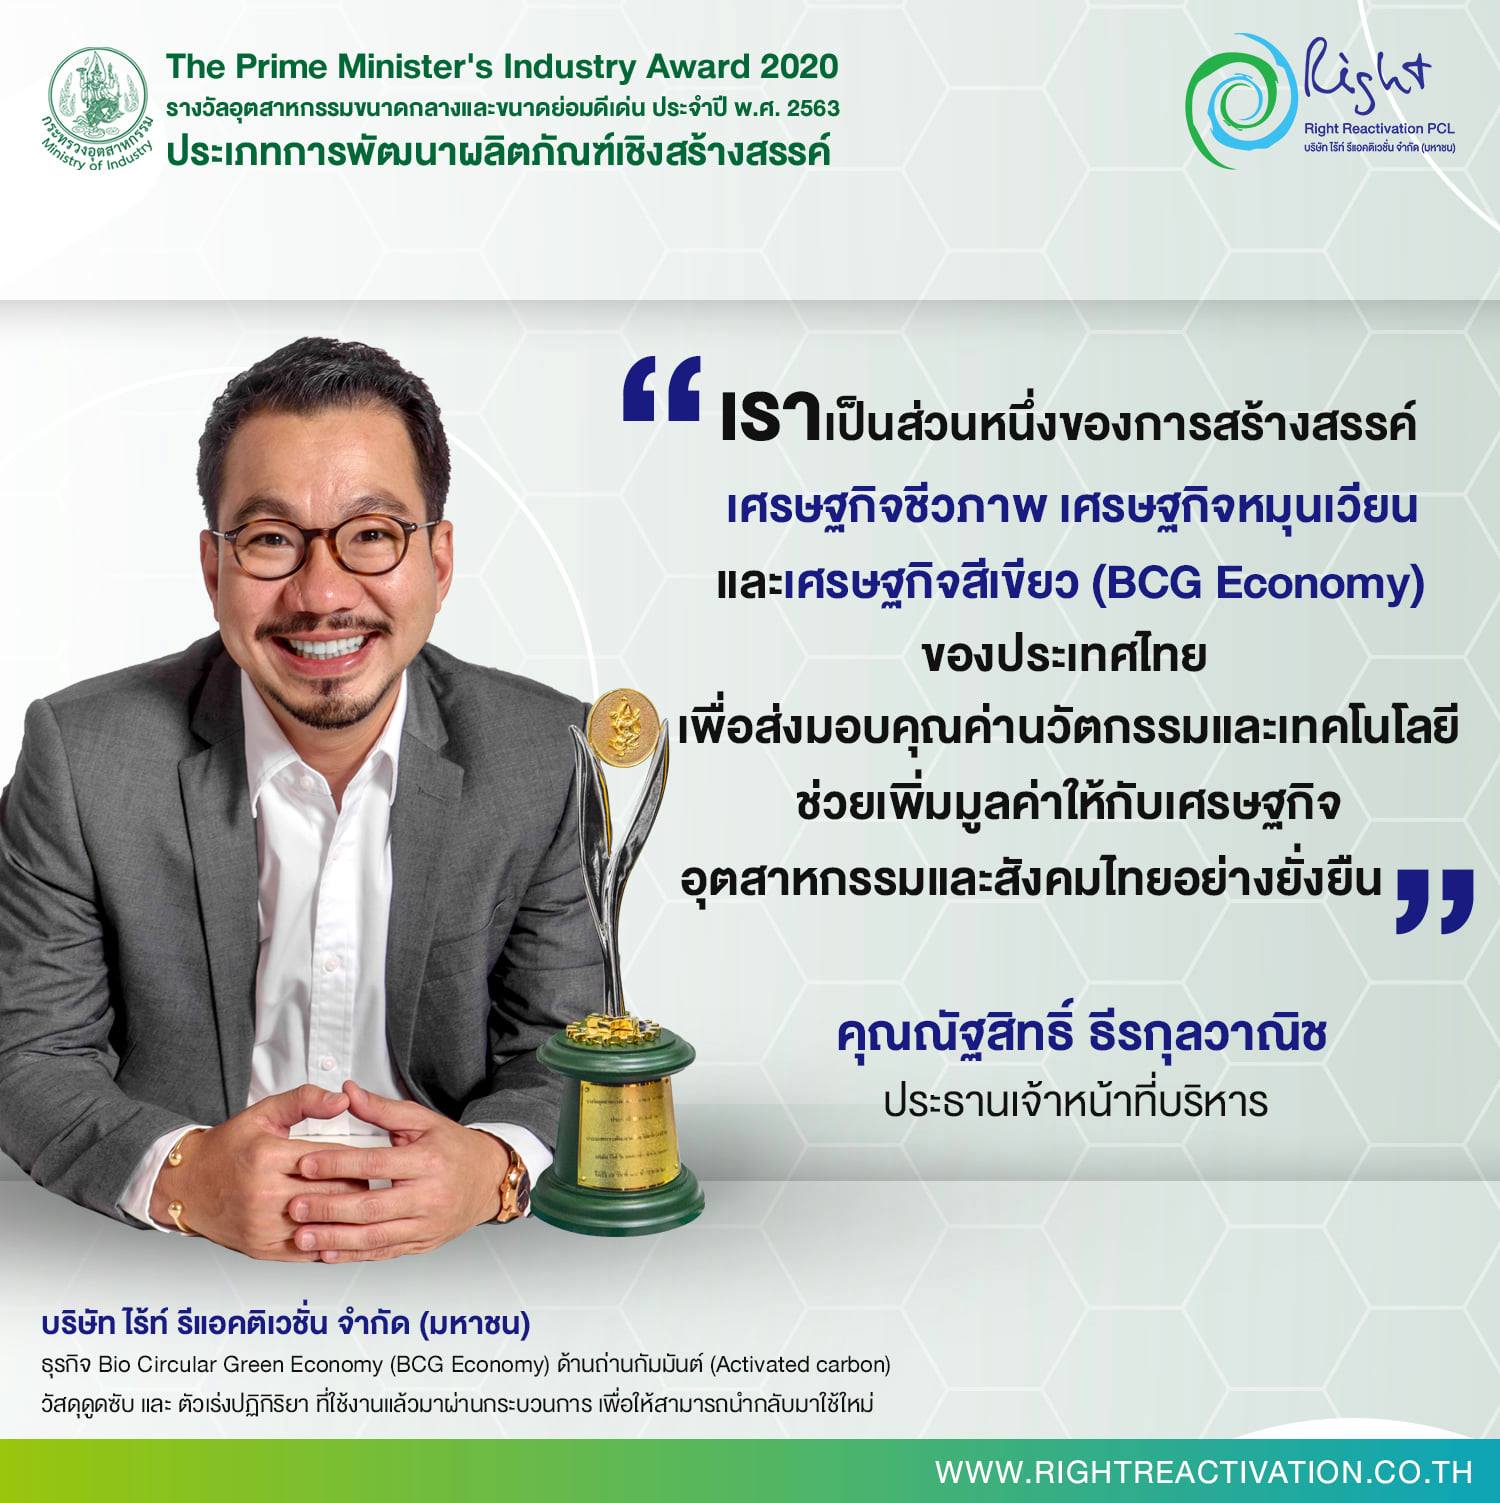 THE PRIME MINISTER'S INDUSTRY AWARD 2020